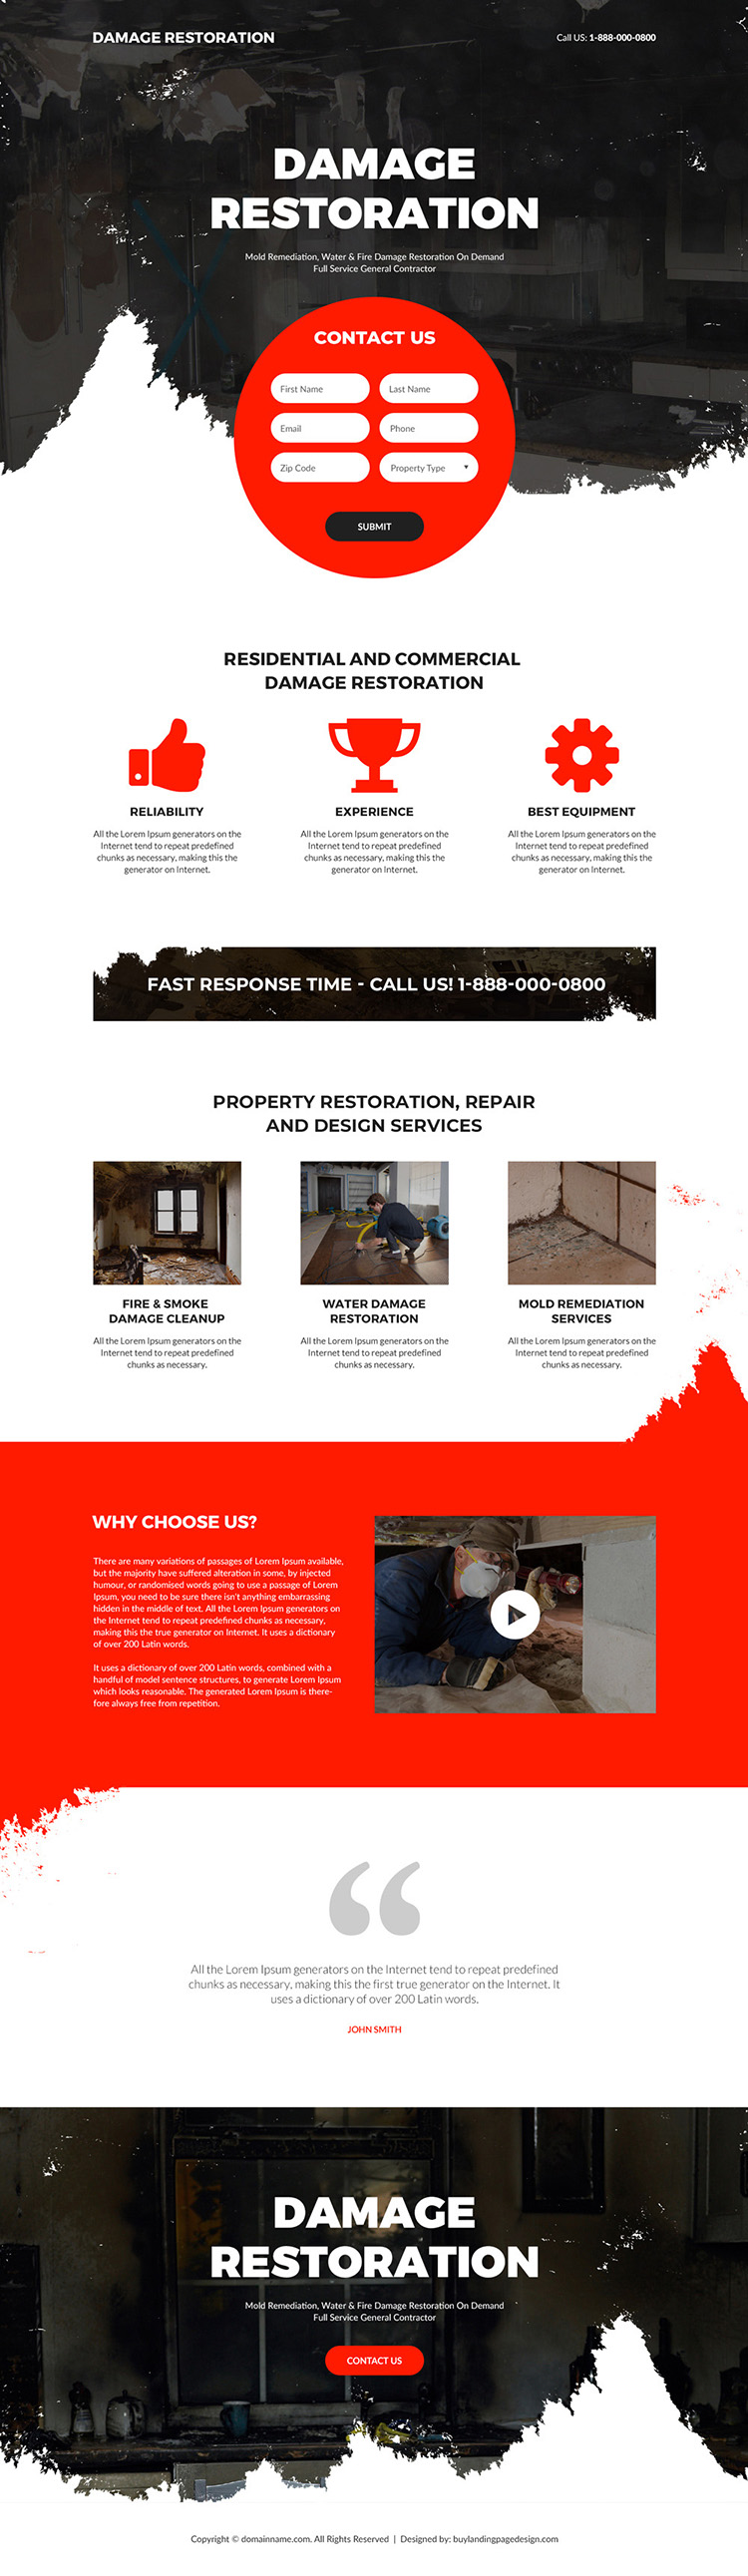 property restoration and repair experts landing page